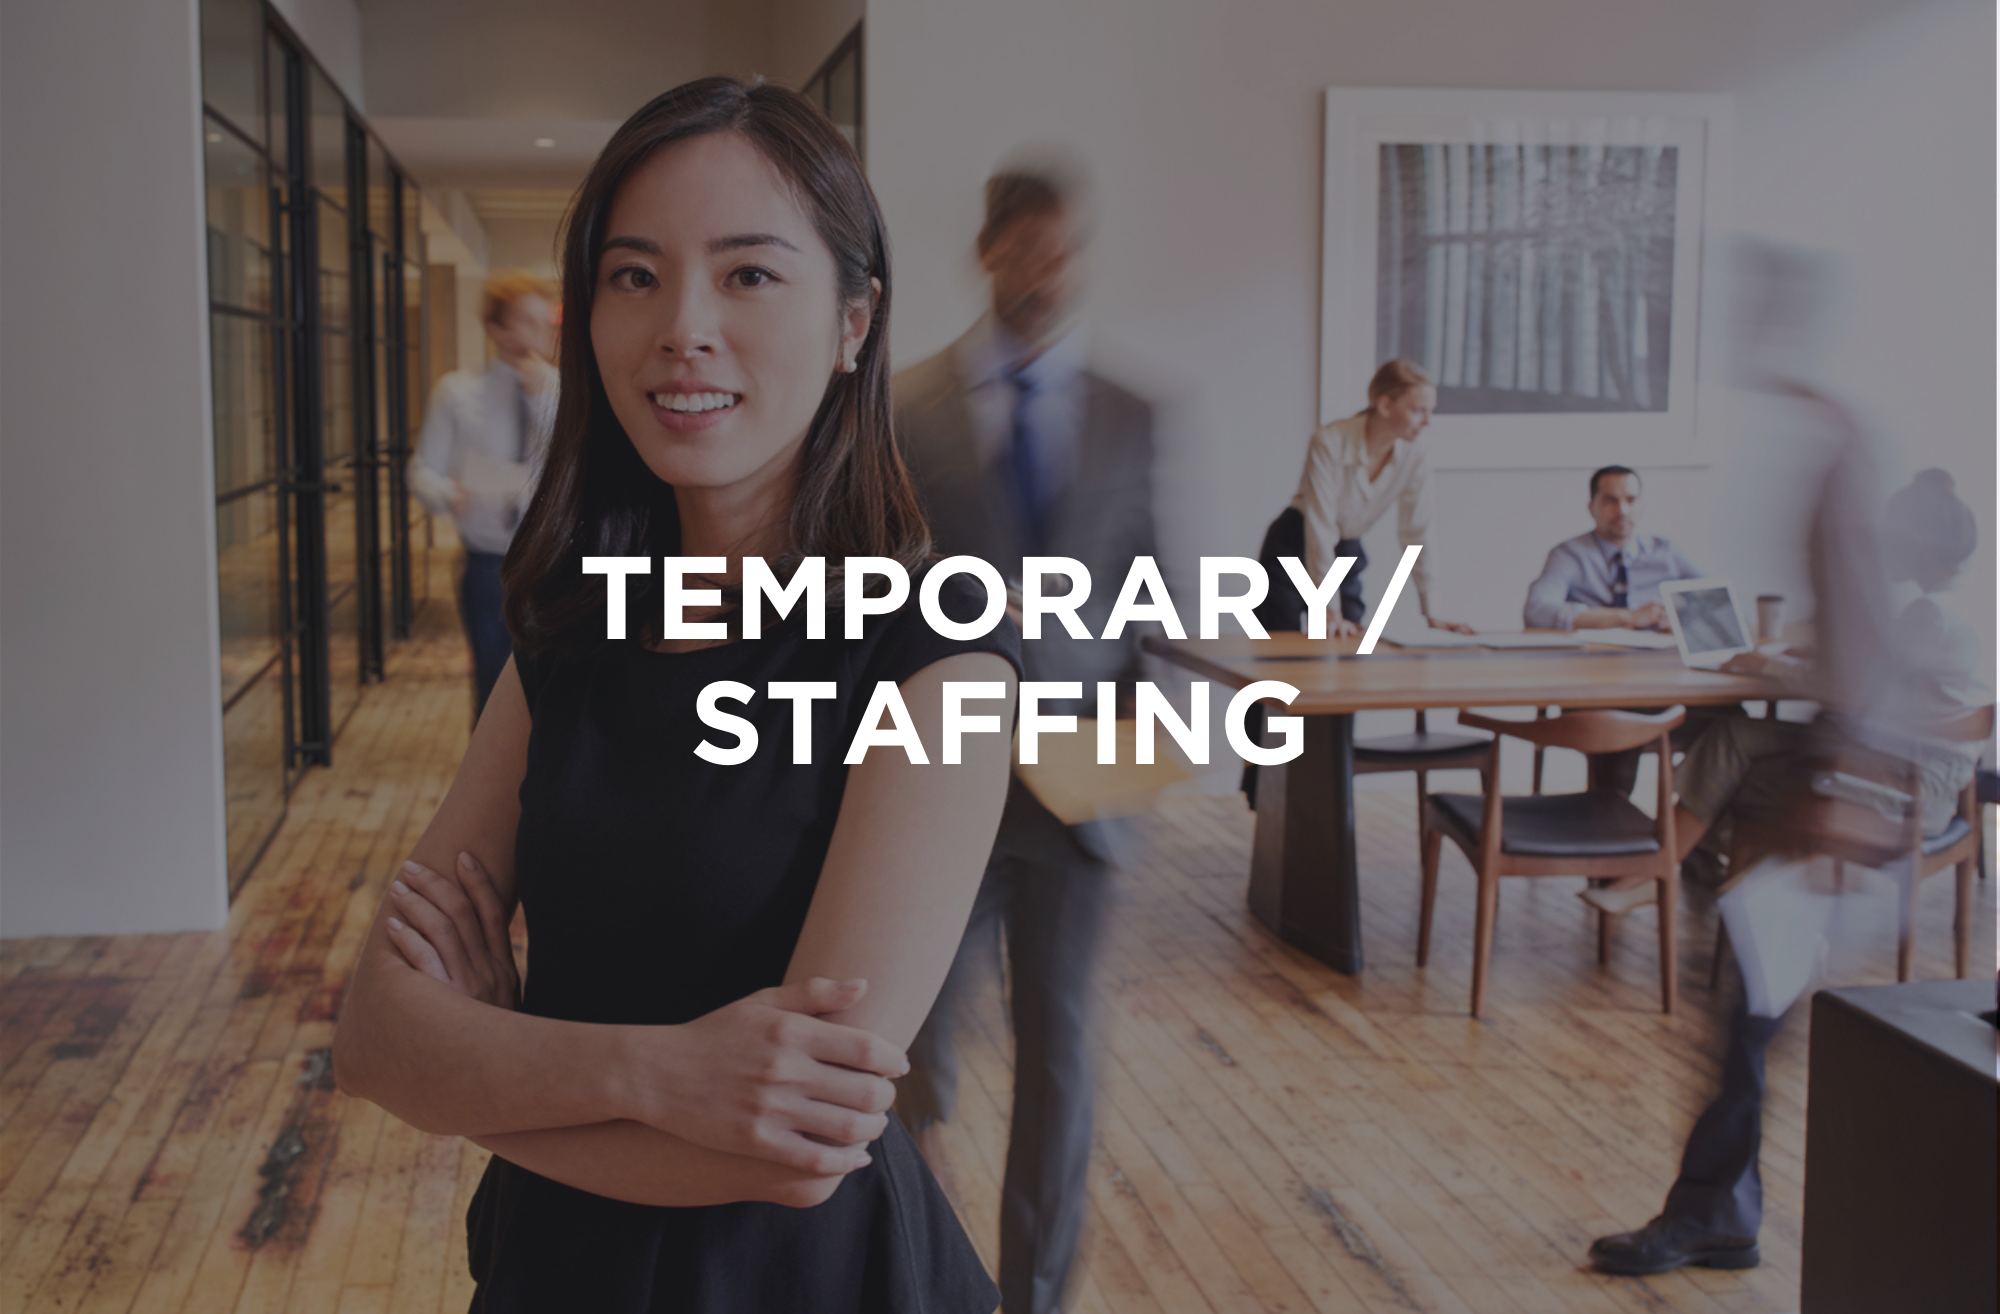 Temporary and Contract Staffing